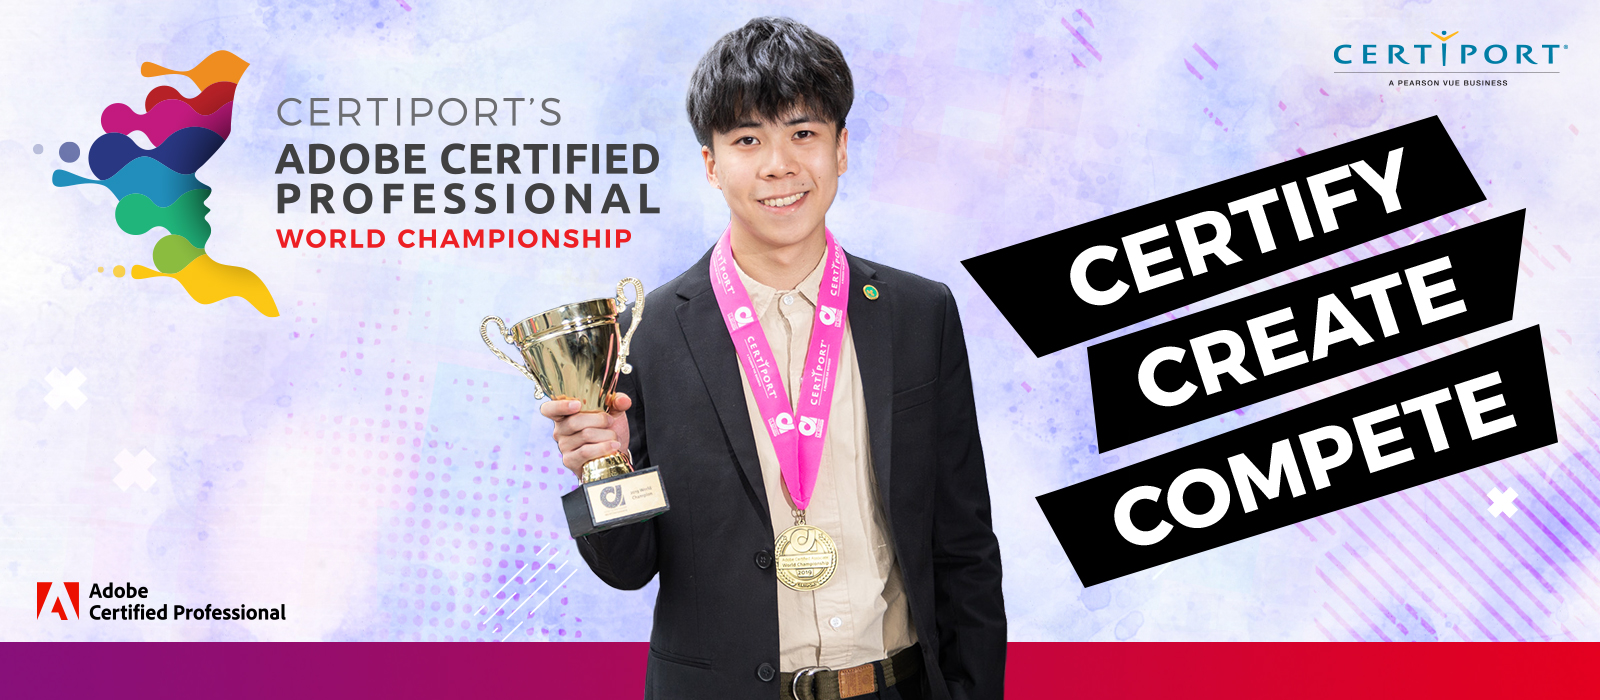 Certiport's Adobe Certified Professional World Championship: Certify, Create, Compete